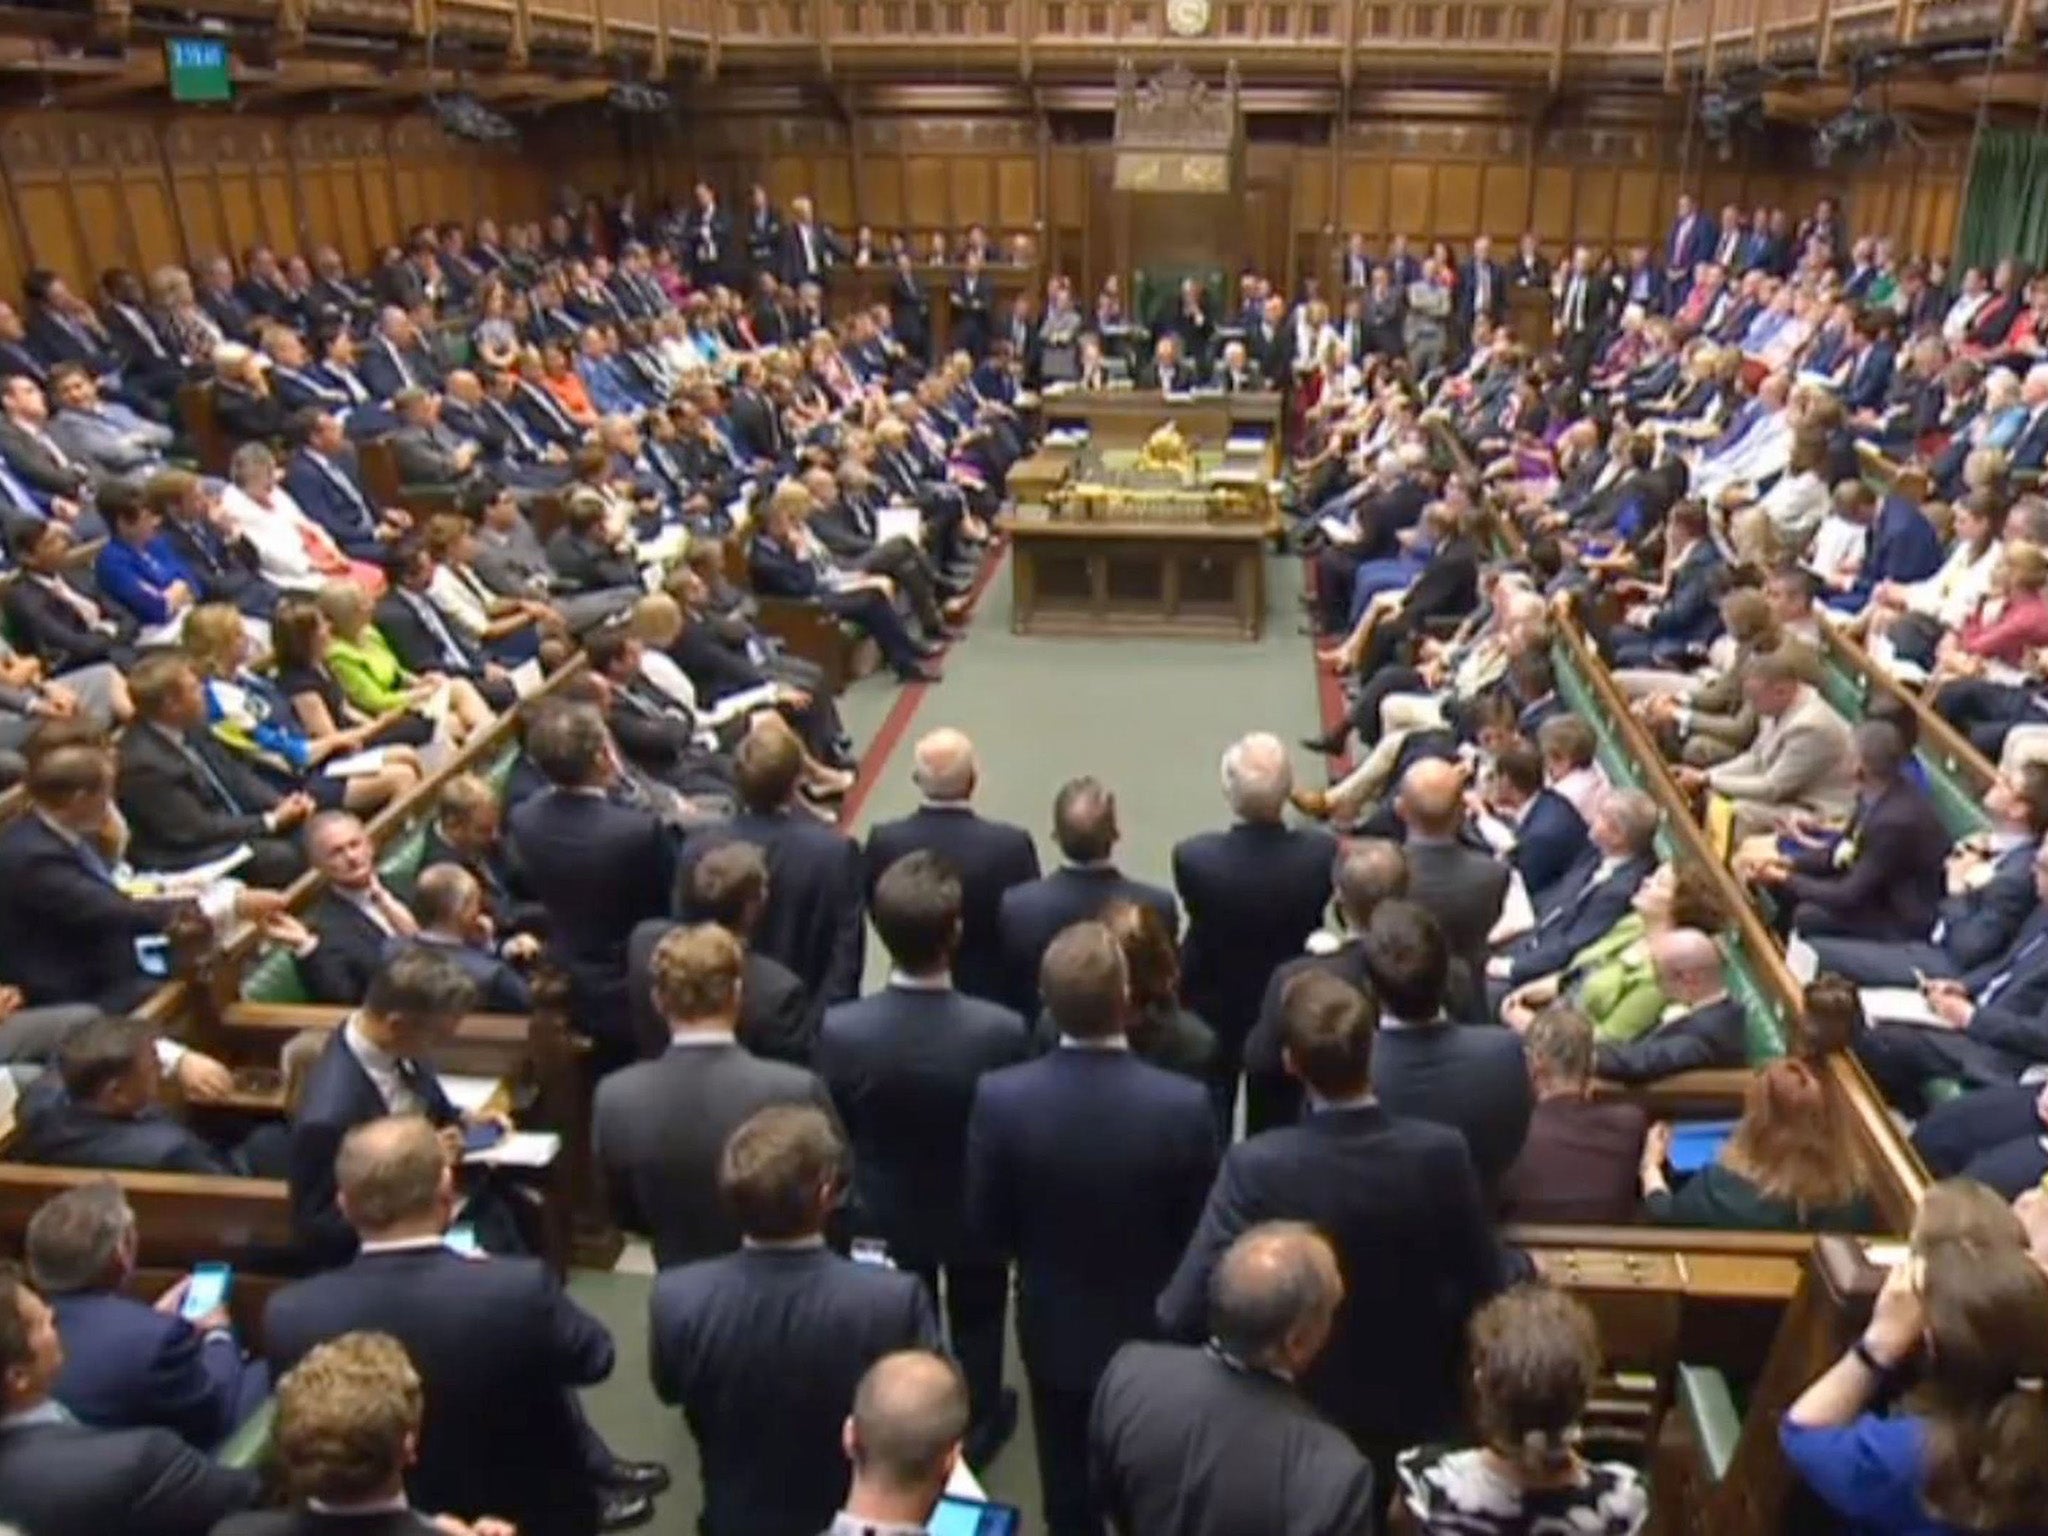 Plans to reduce the number of MPs appear to be dead